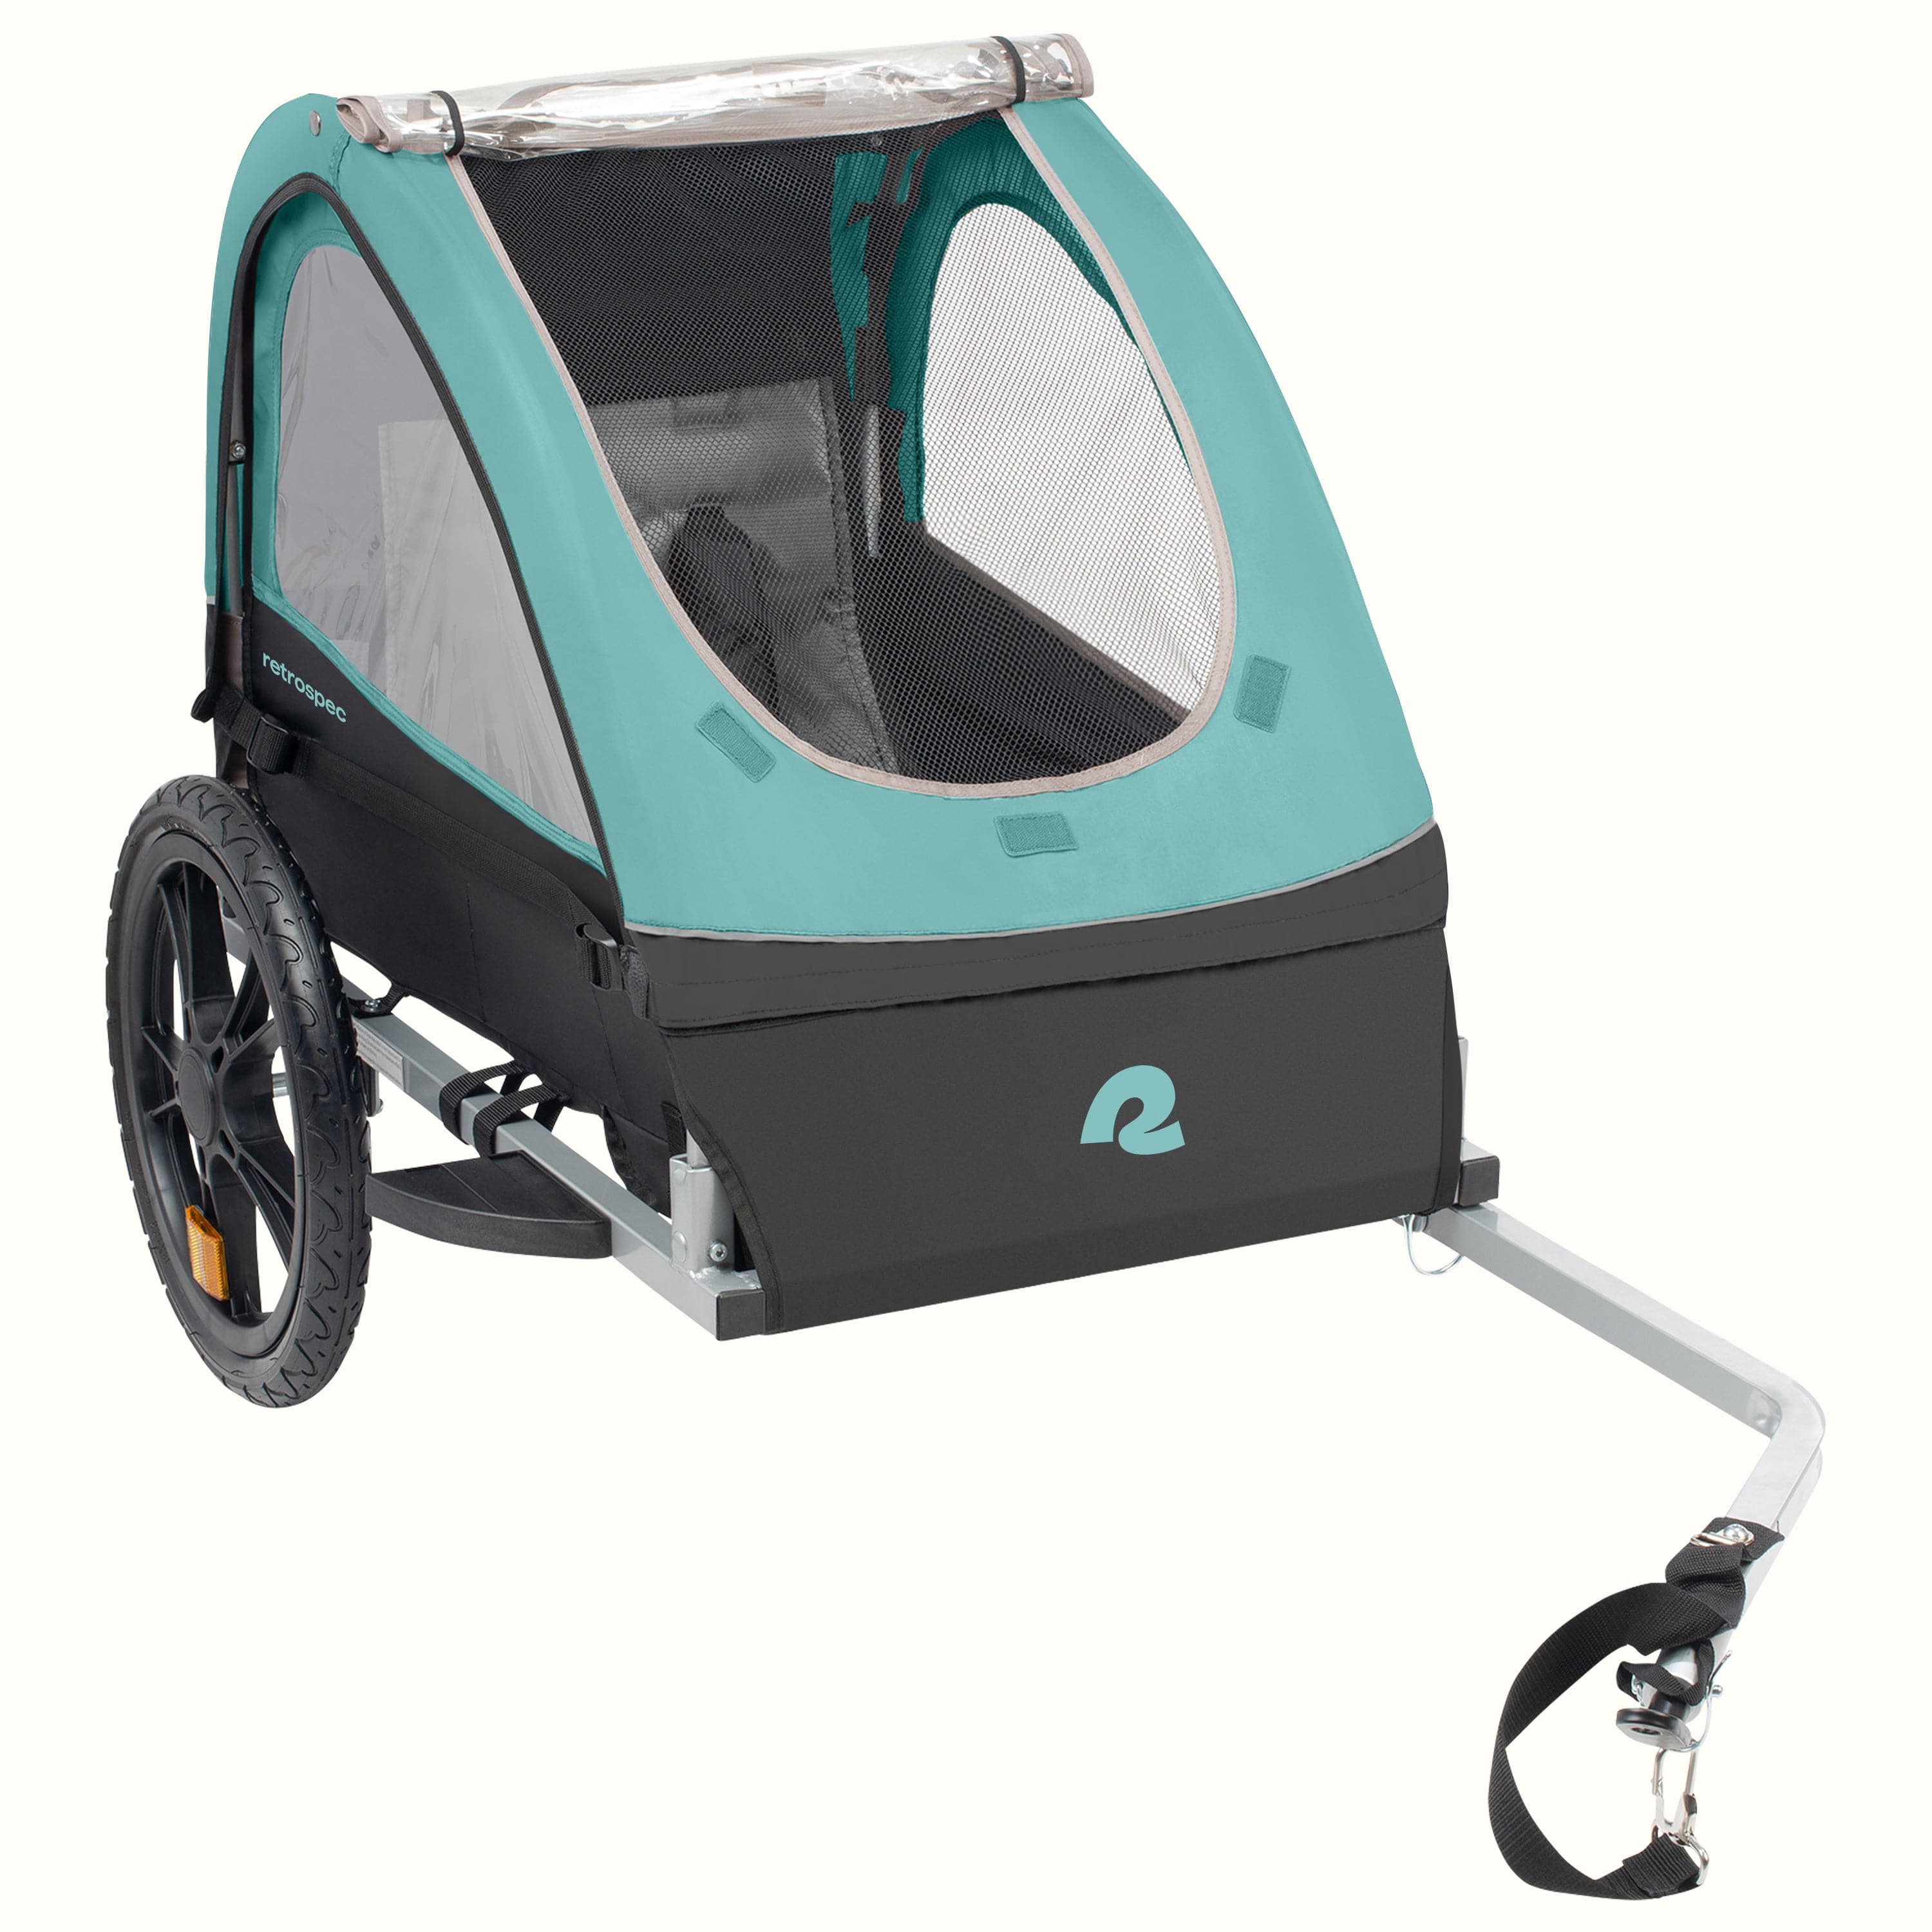 Croozer Kid for 2 - Child trailer, Product Review